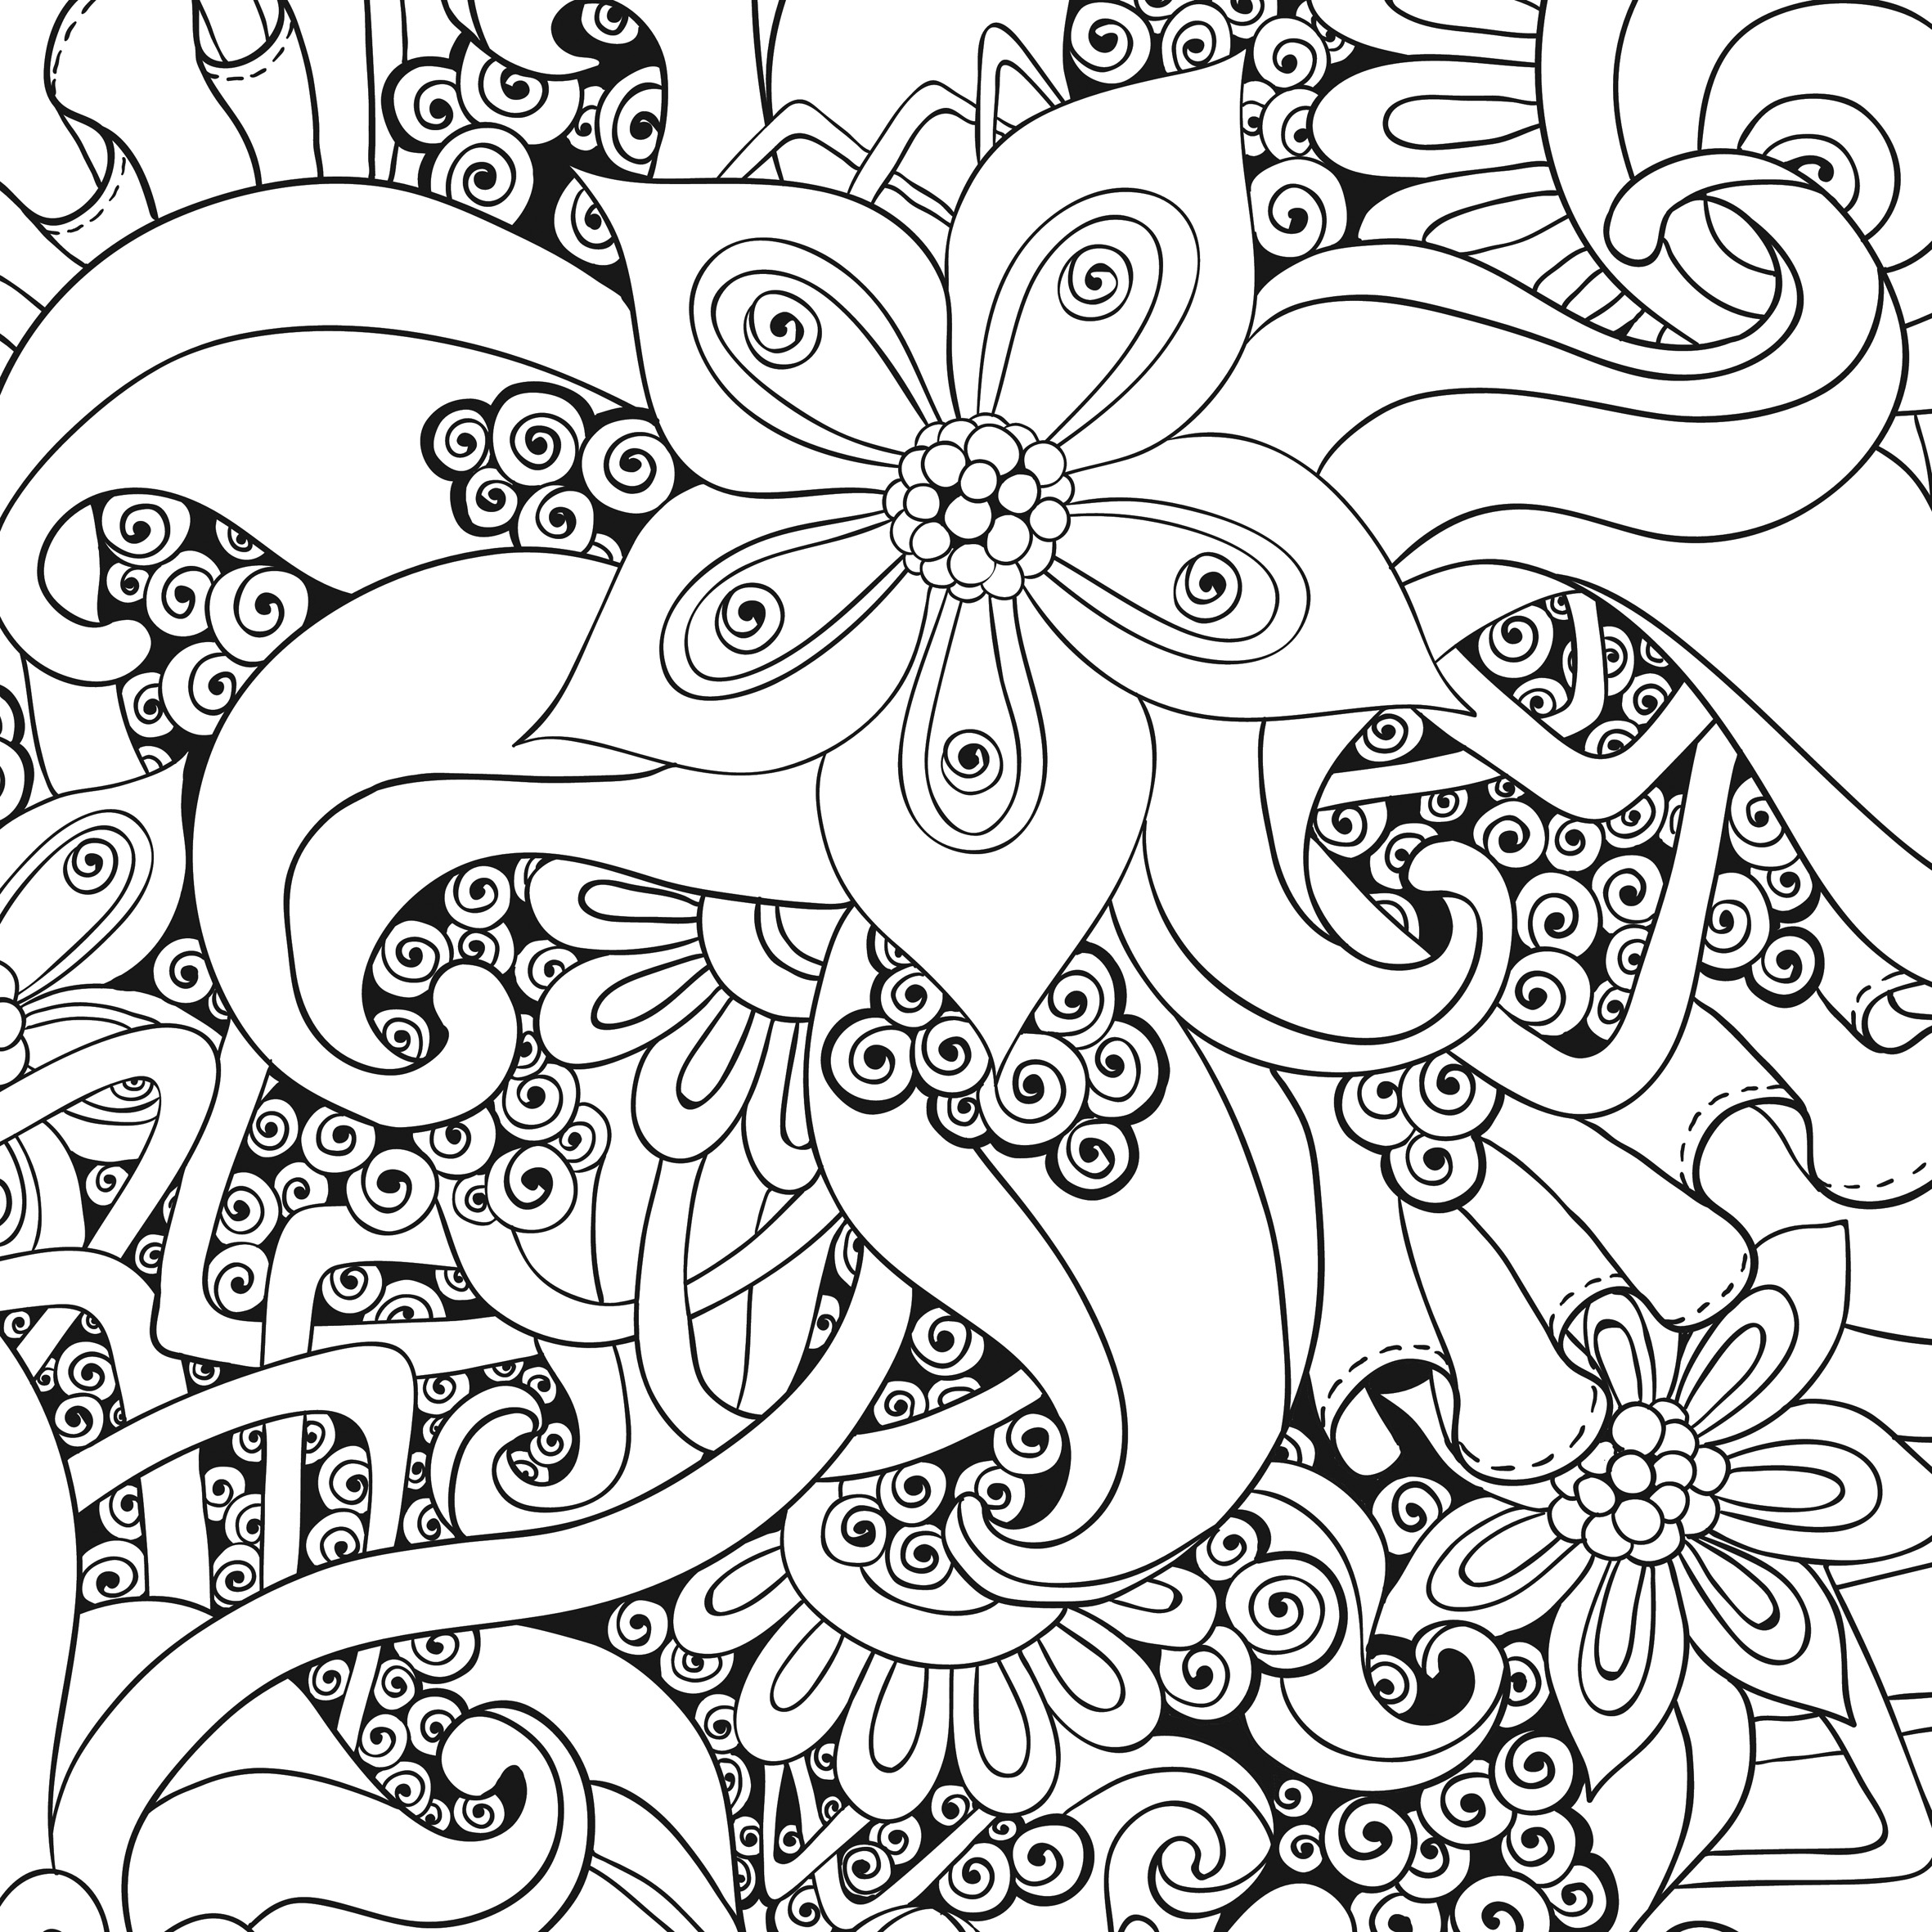 Anti-stress #79 (Relaxation) – Printable coloring pages